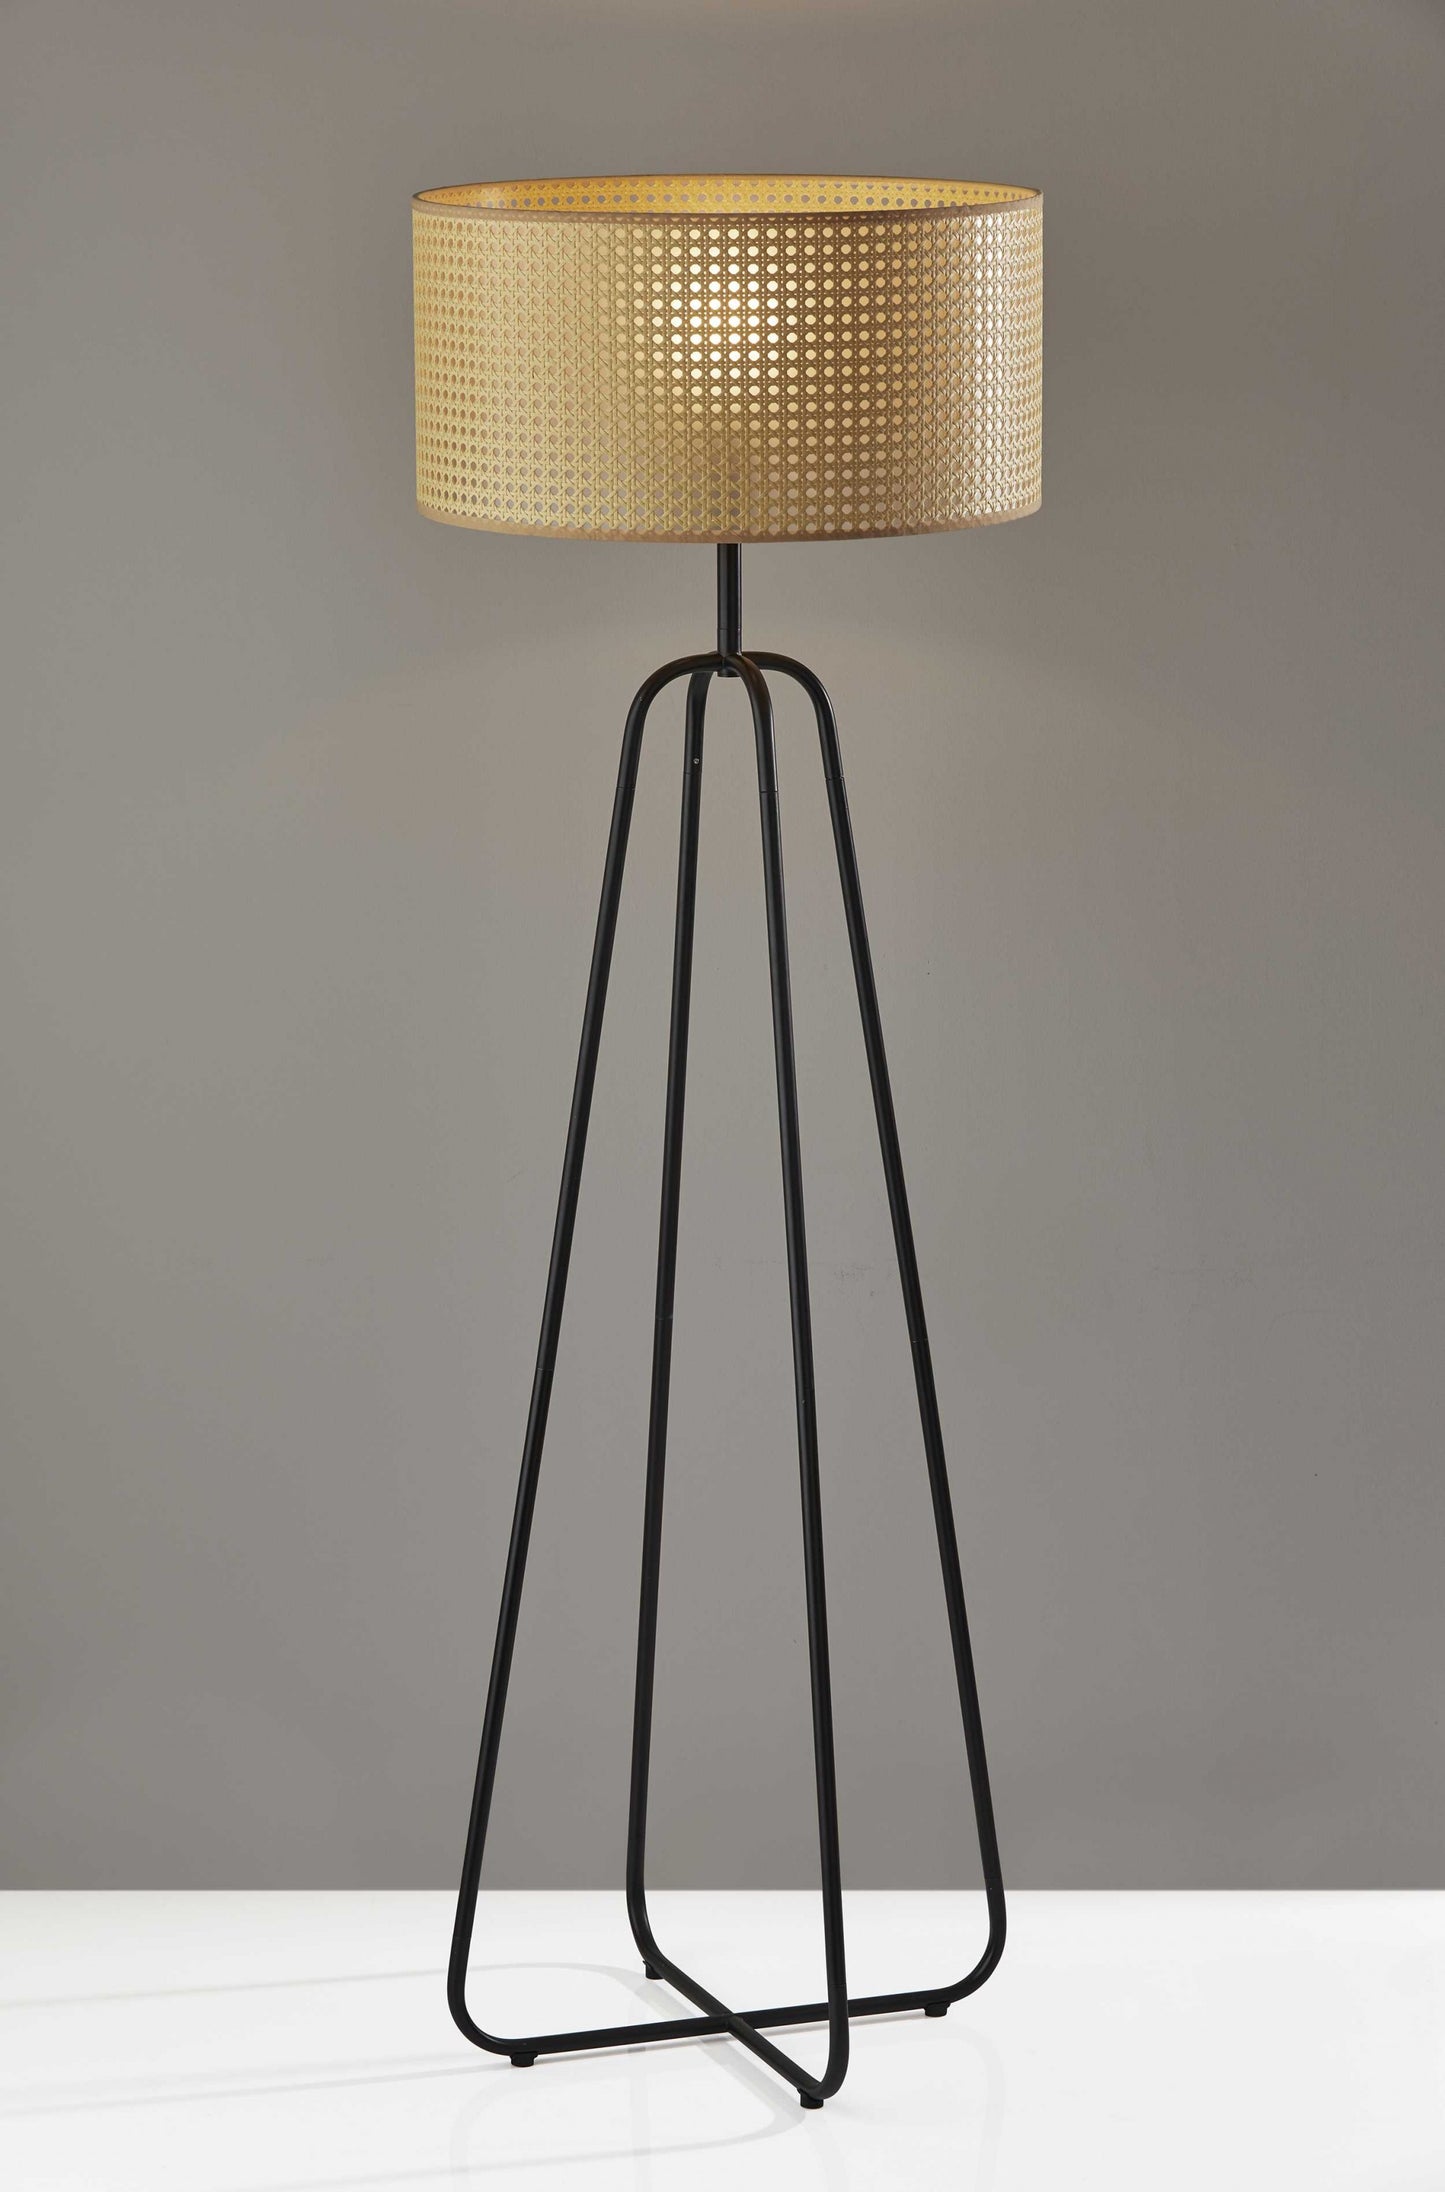 Open Cane Web Natural Shade Floor Lamp With Dark Bronze Base